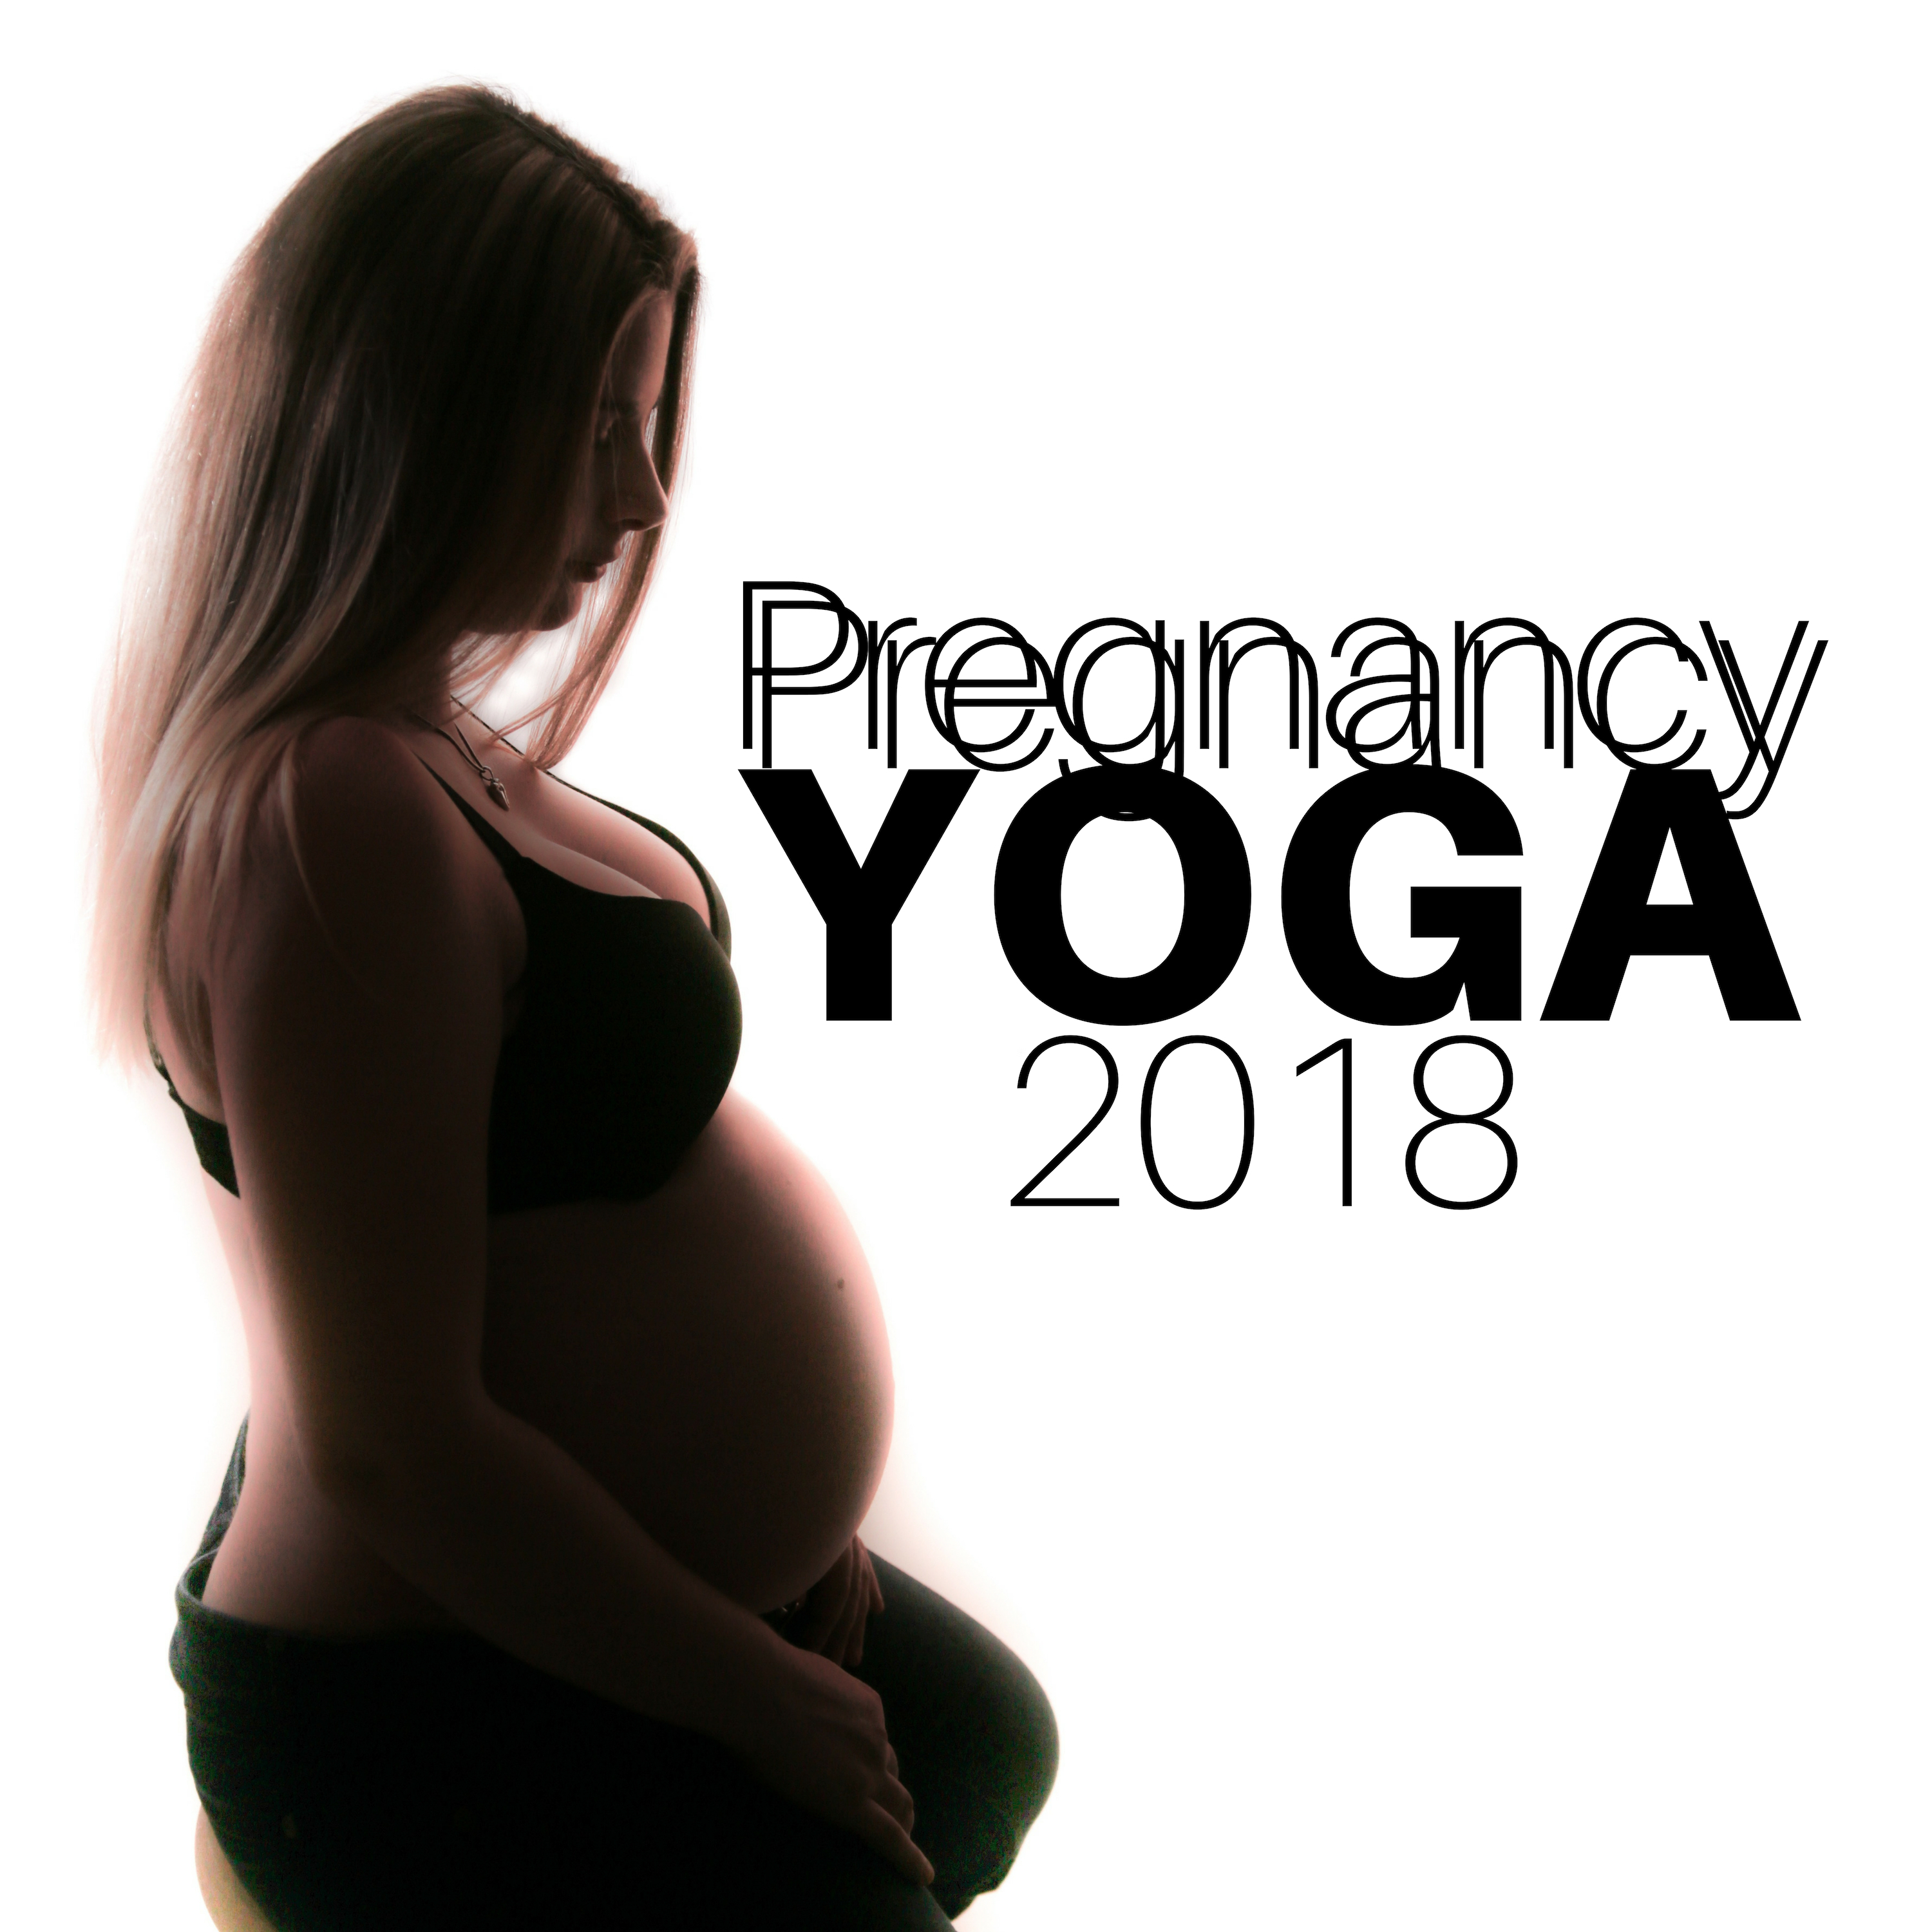 Pregnancy Yoga 2018 - Asian Music Collection for Babies in the Womb